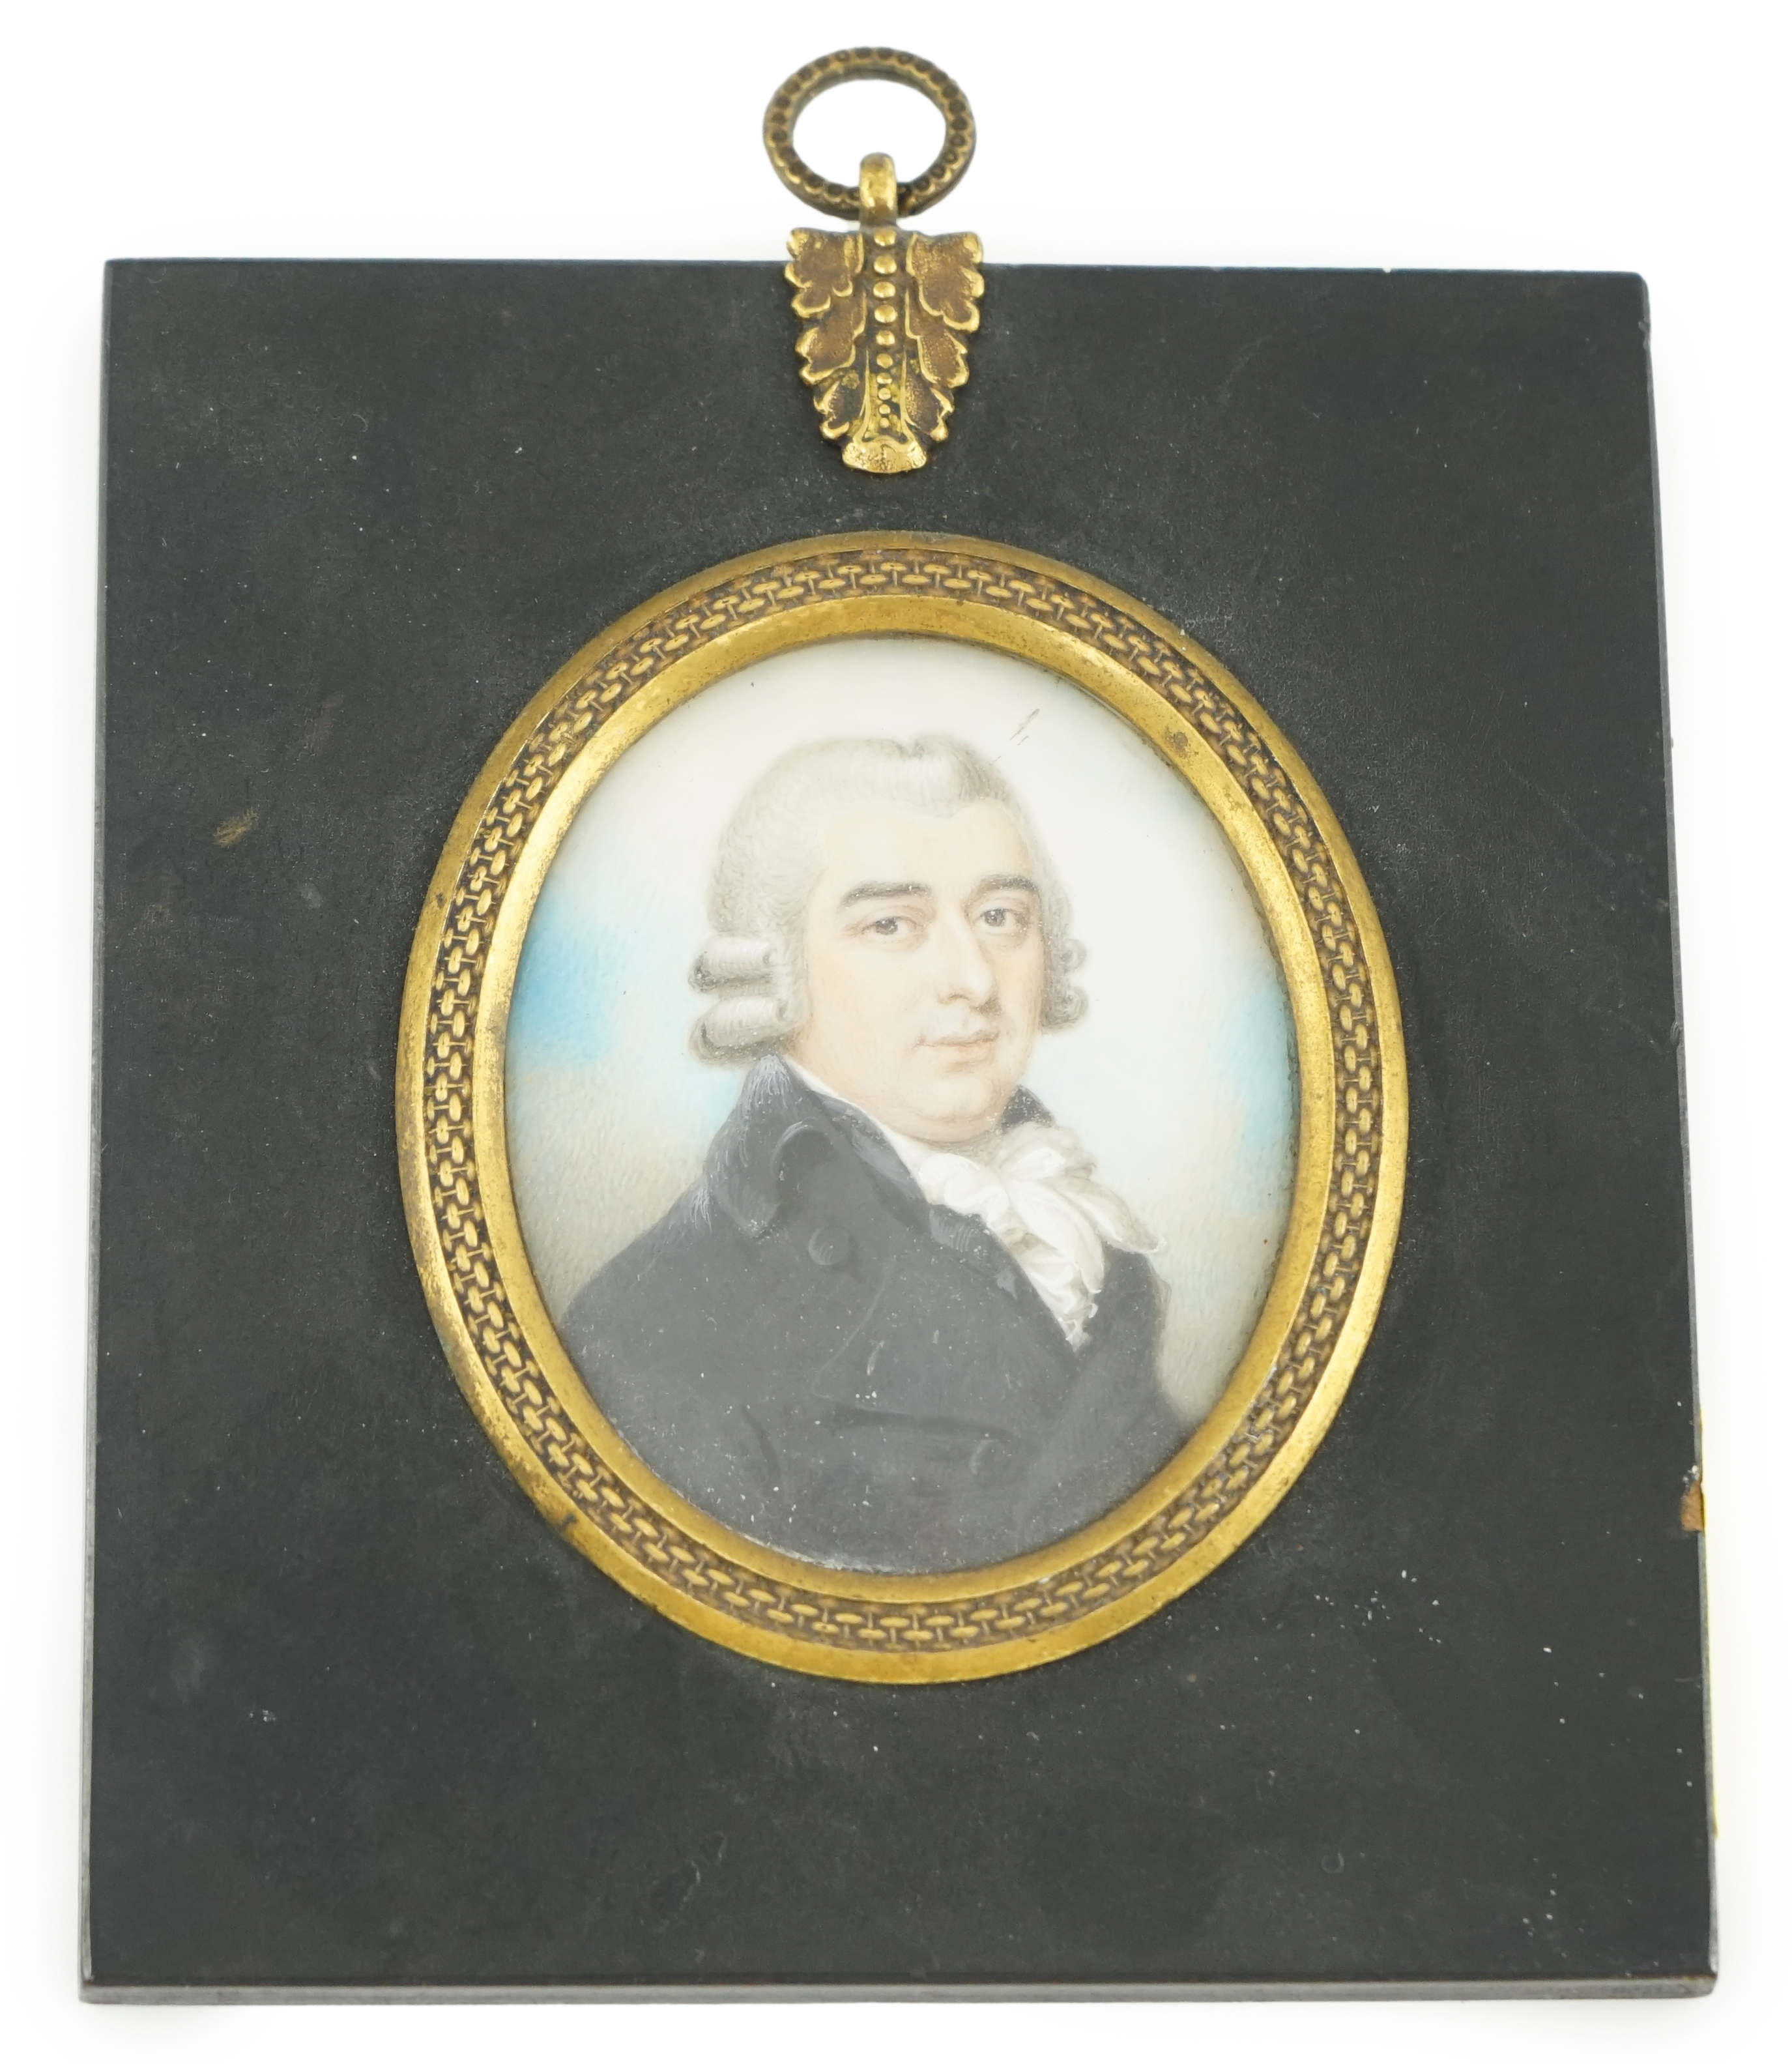 Andrew Plimer (1763-1837), Portrait miniature of Sir John Silvester, watercolour on ivory, 6.8 x 5.4cm. CITES Submission reference RP9MKXXH